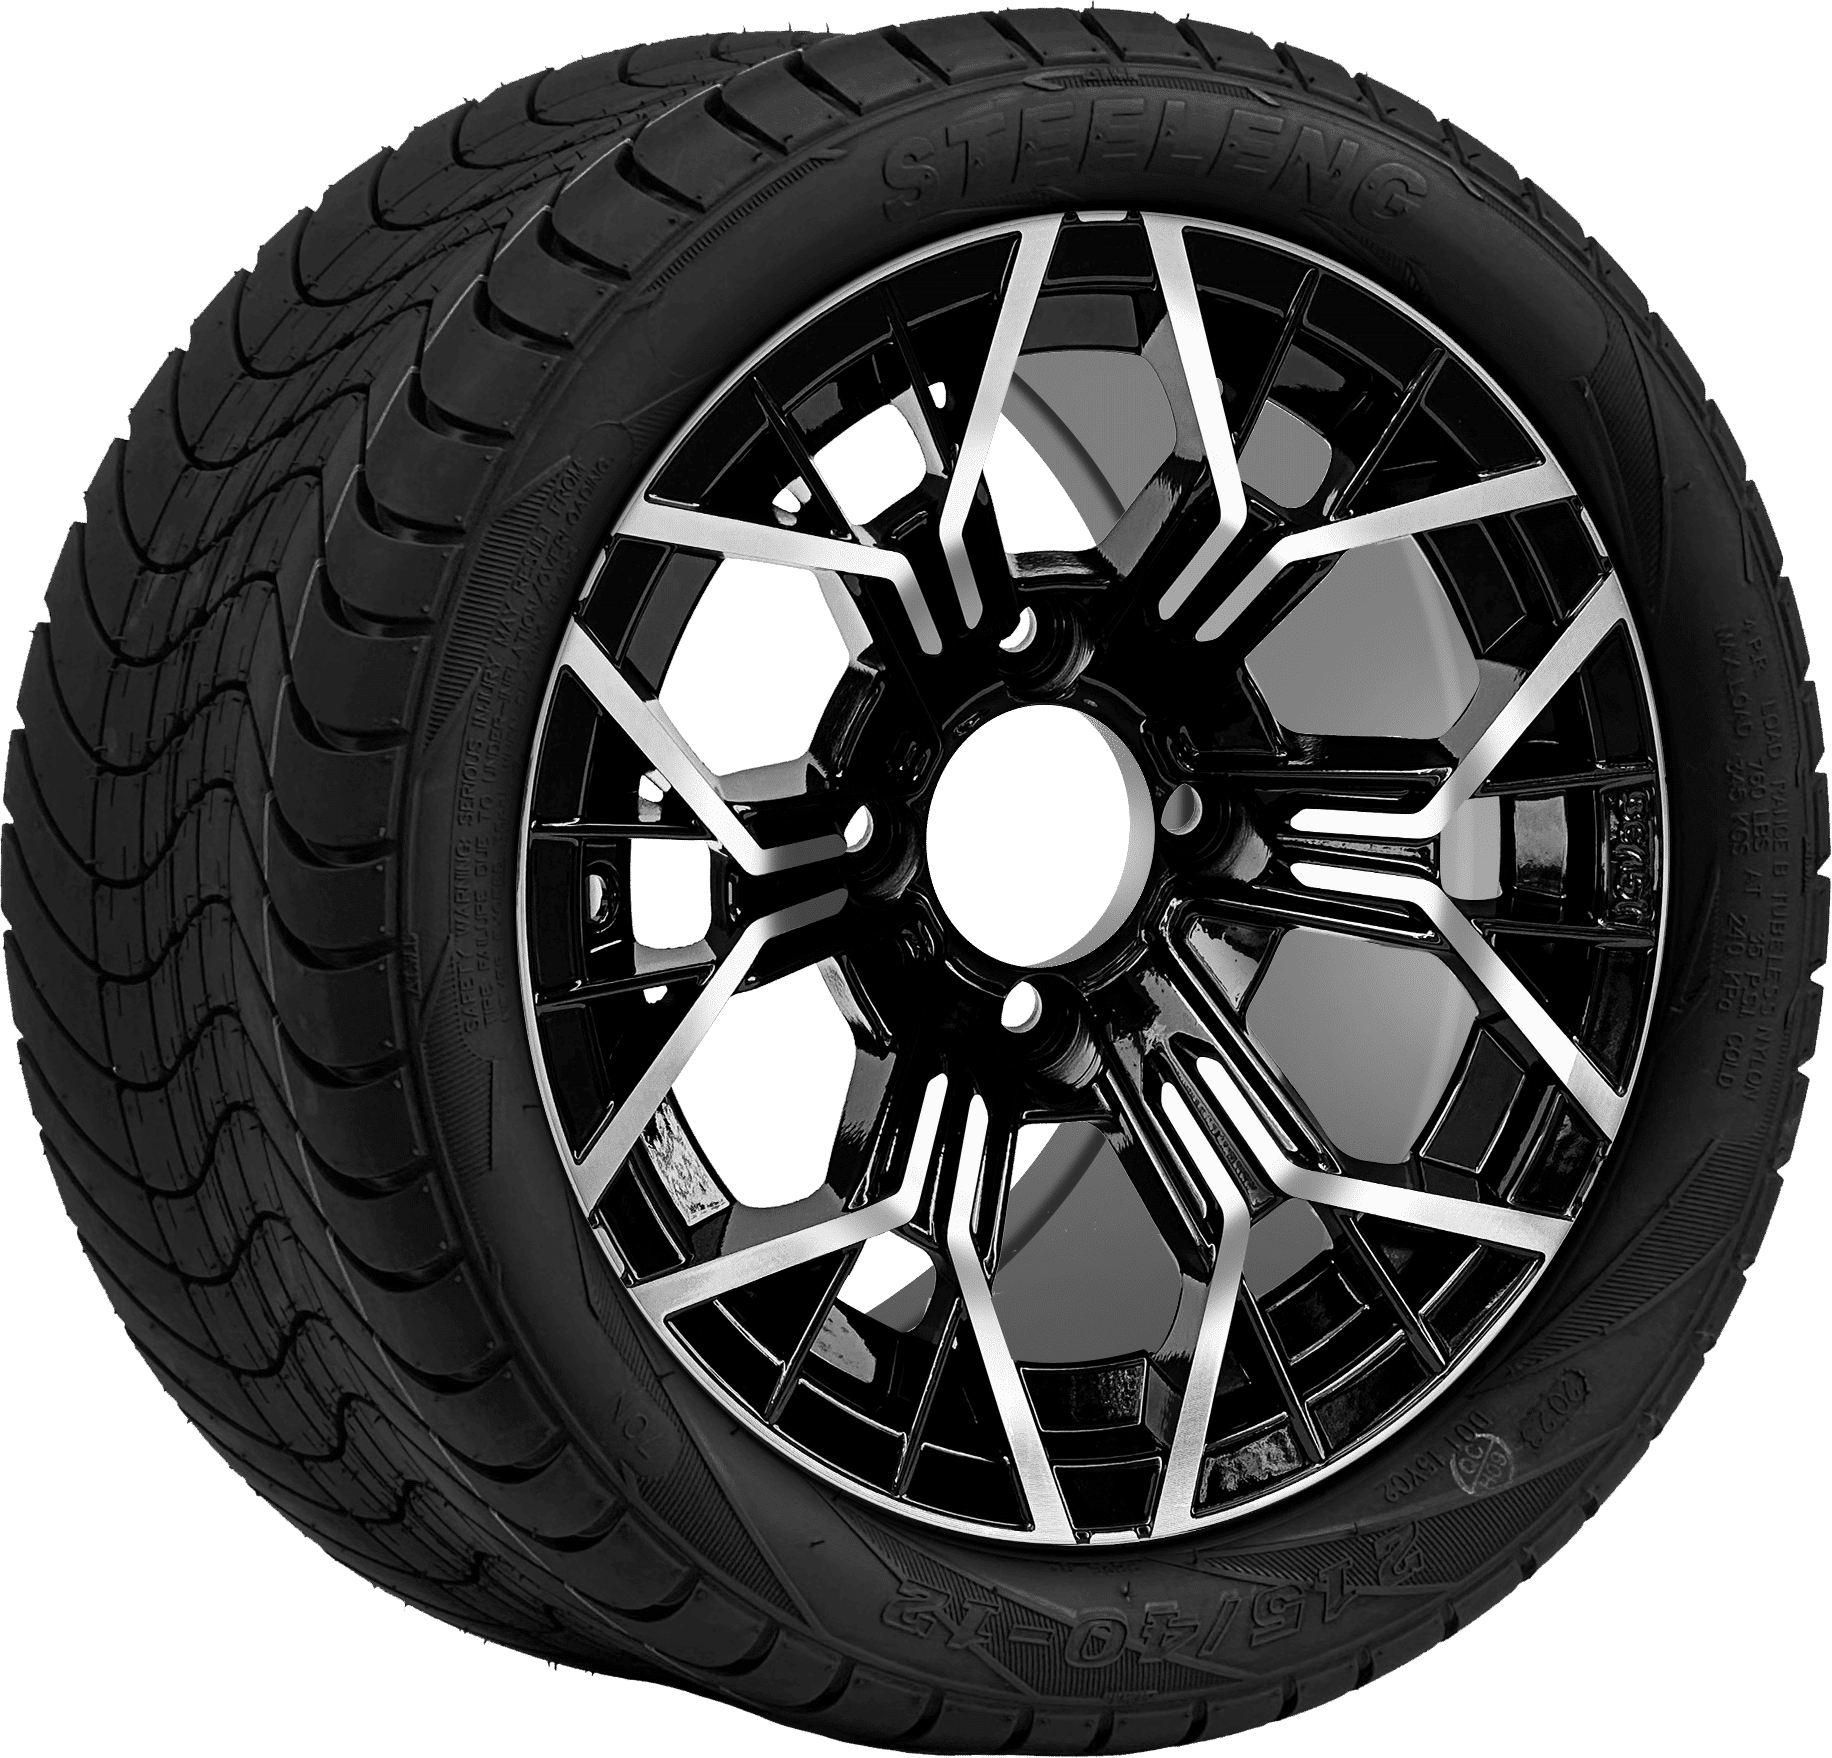 BNDL-TR1211-WH1267-CC0025-LN0004 12″ MANTIS MACHINED/BLACK WHEEL – ALUMINUM ALLOY / STEELENG 215/40-12 LOW PROFILE TIRE DOT APPROVED